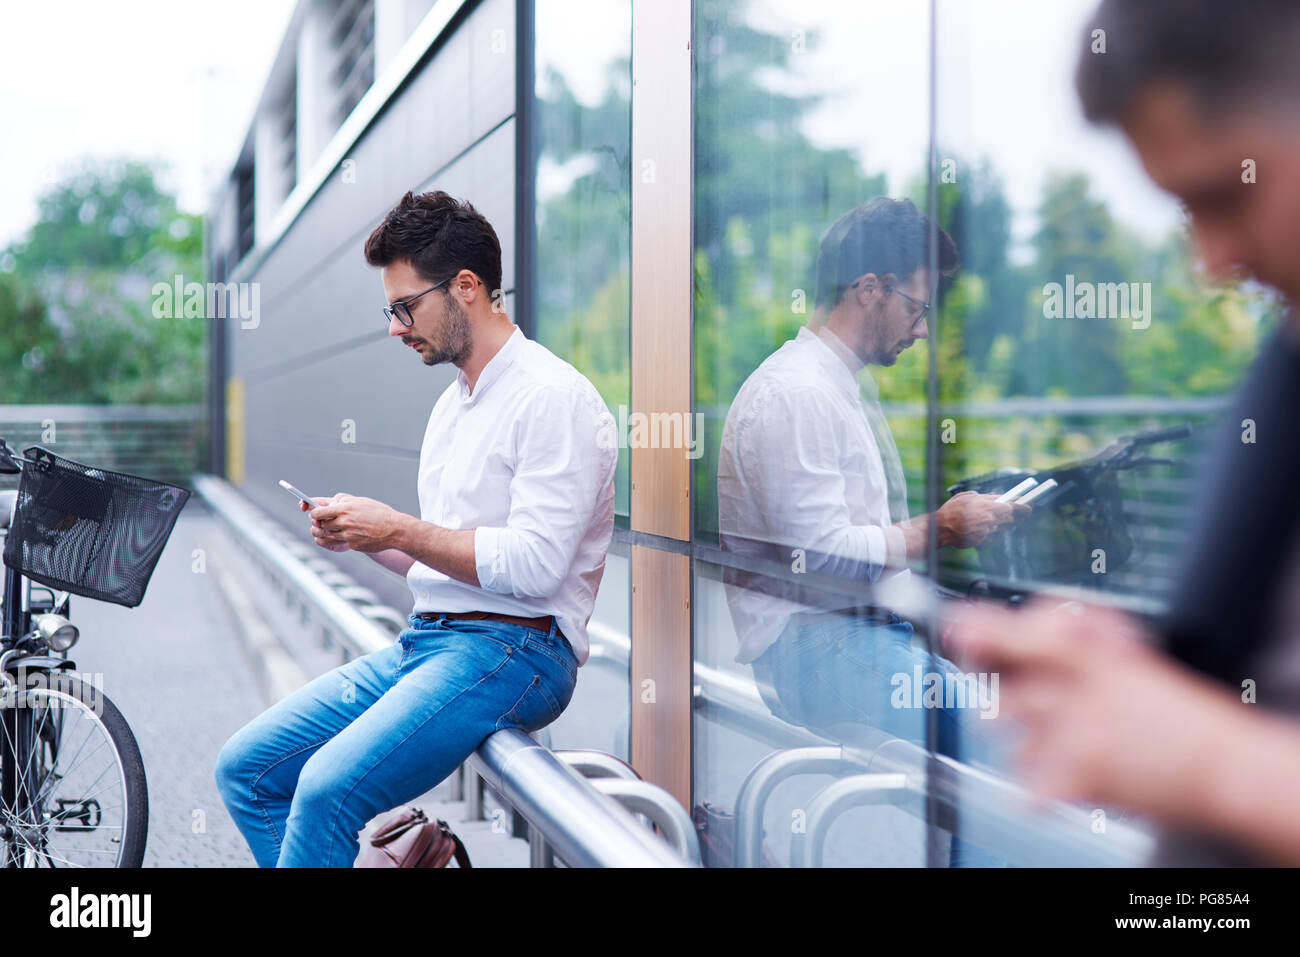 Businessman with bicycle using cell phone outdoors Banque D'Images